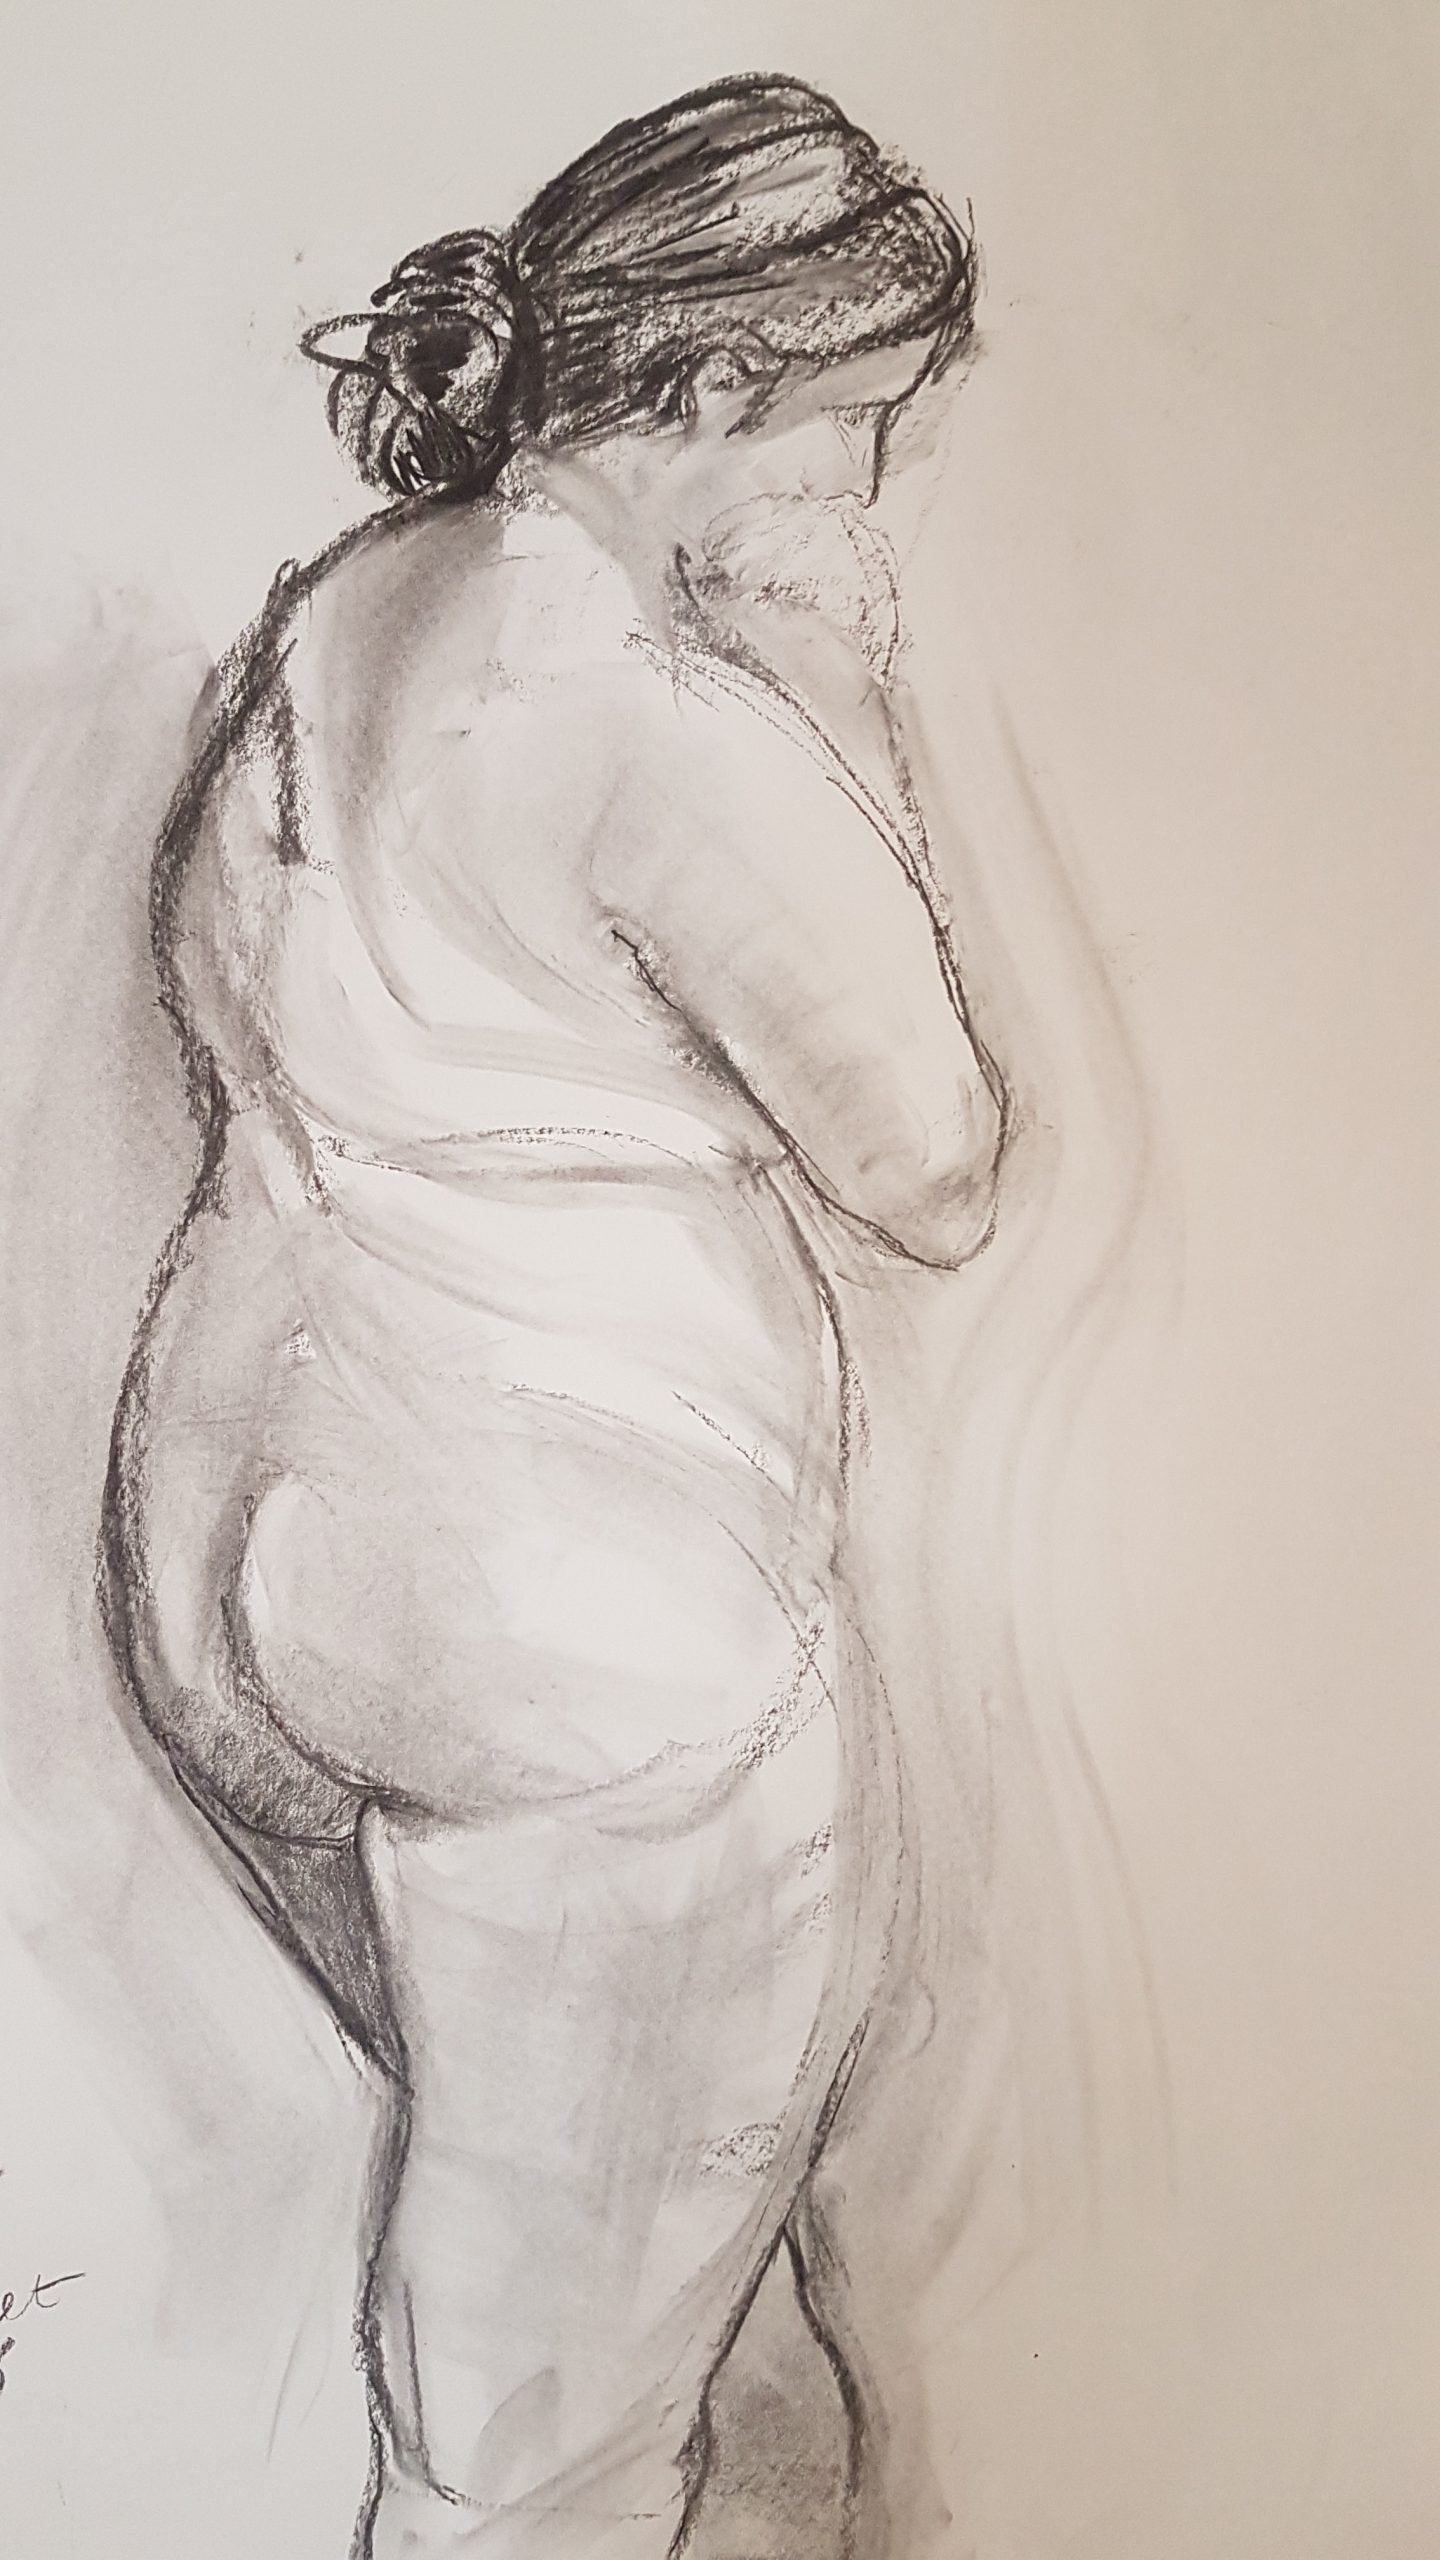 Janet LEITH, Untitled (Nude), charcoal drawing. Courtesy of the artist